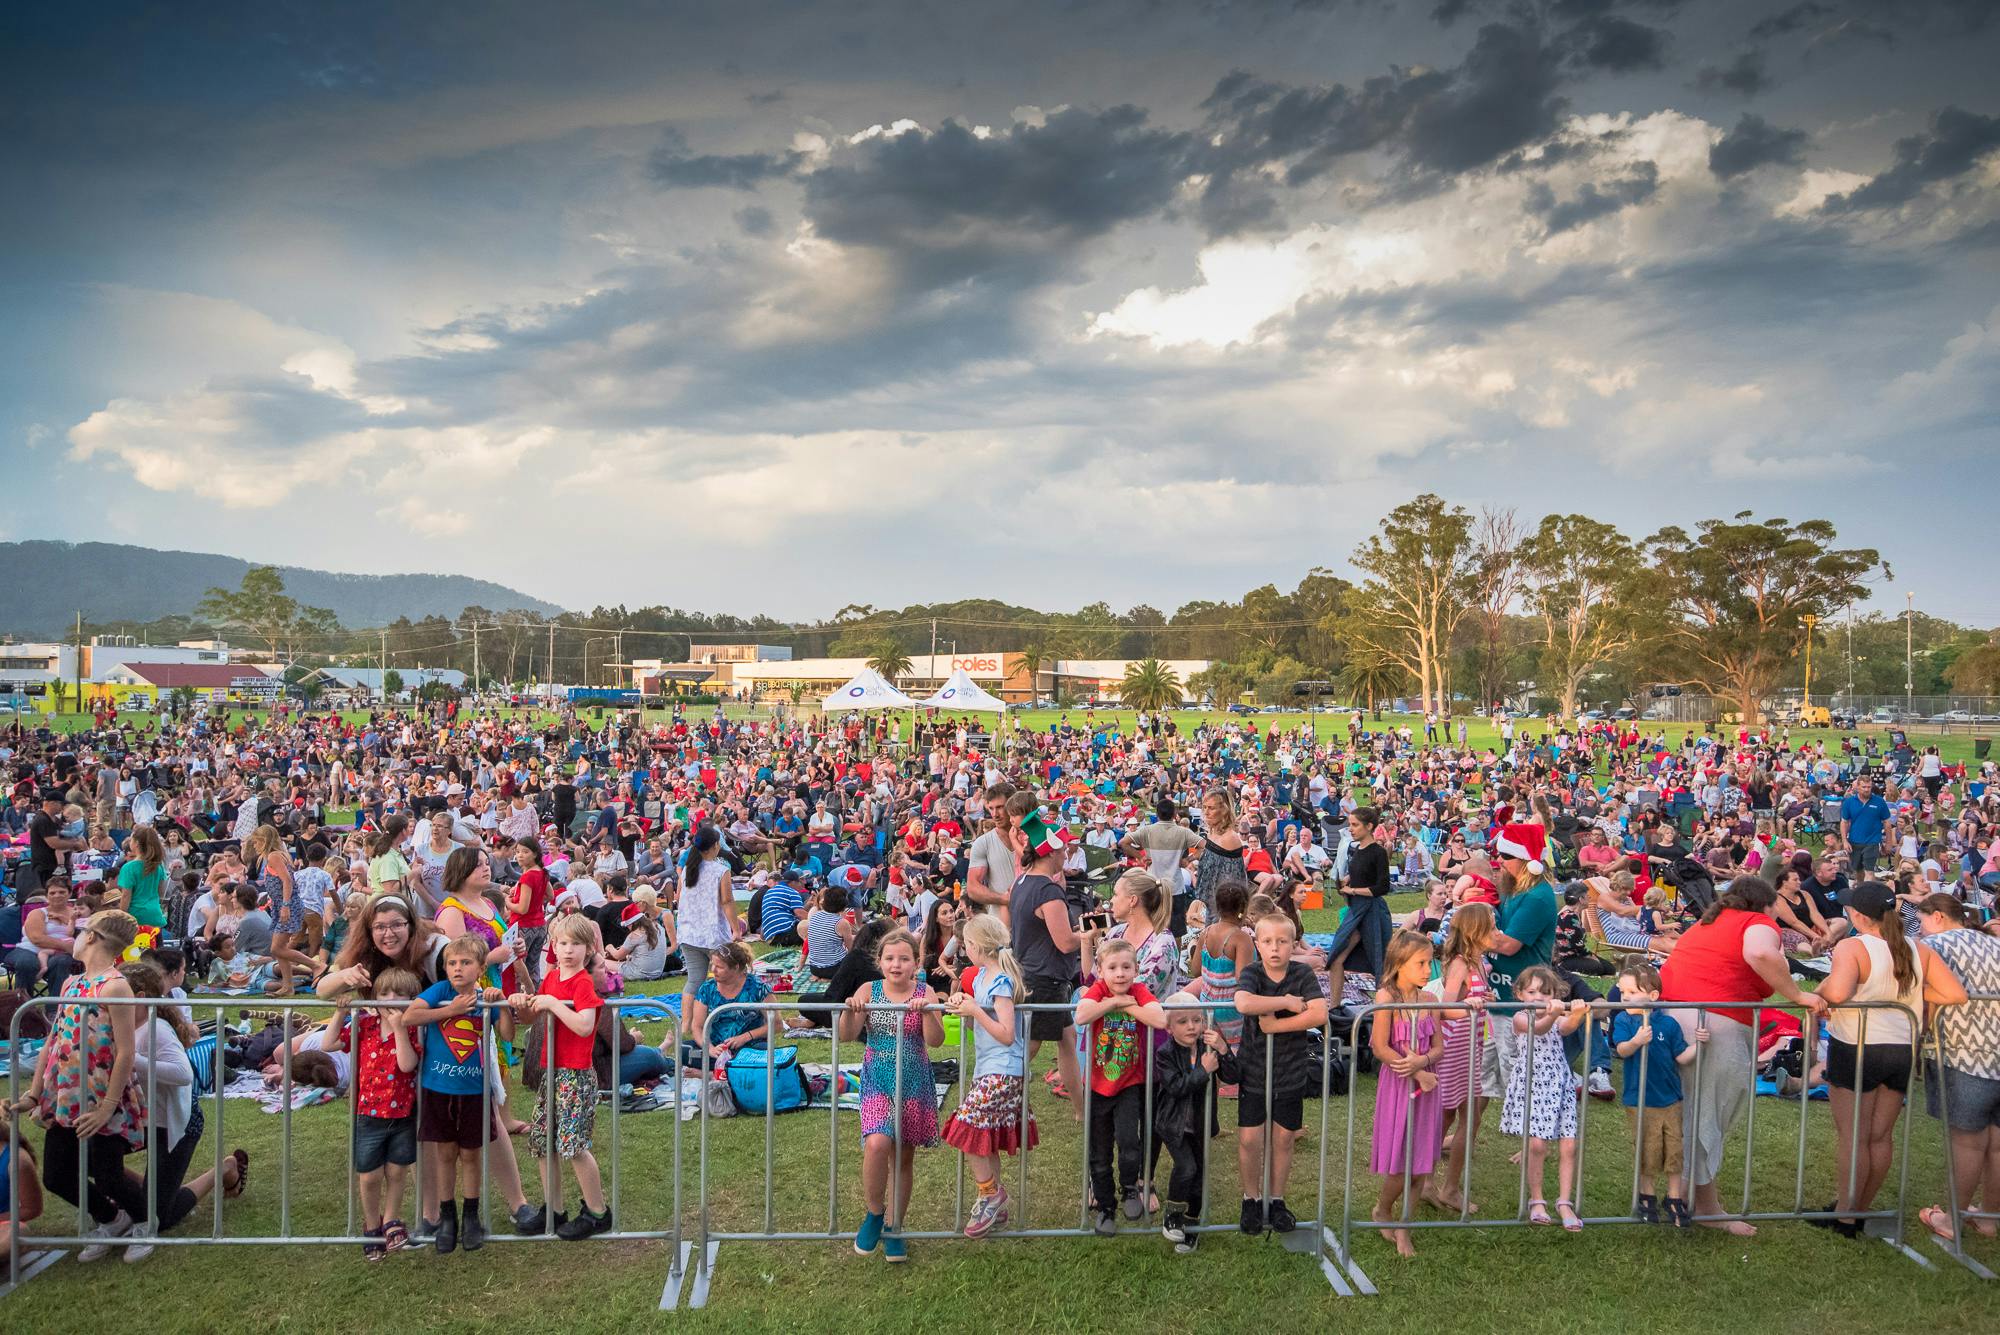 A perfect place for people to celebrate at large community events. Image by Rob Wright Photo.